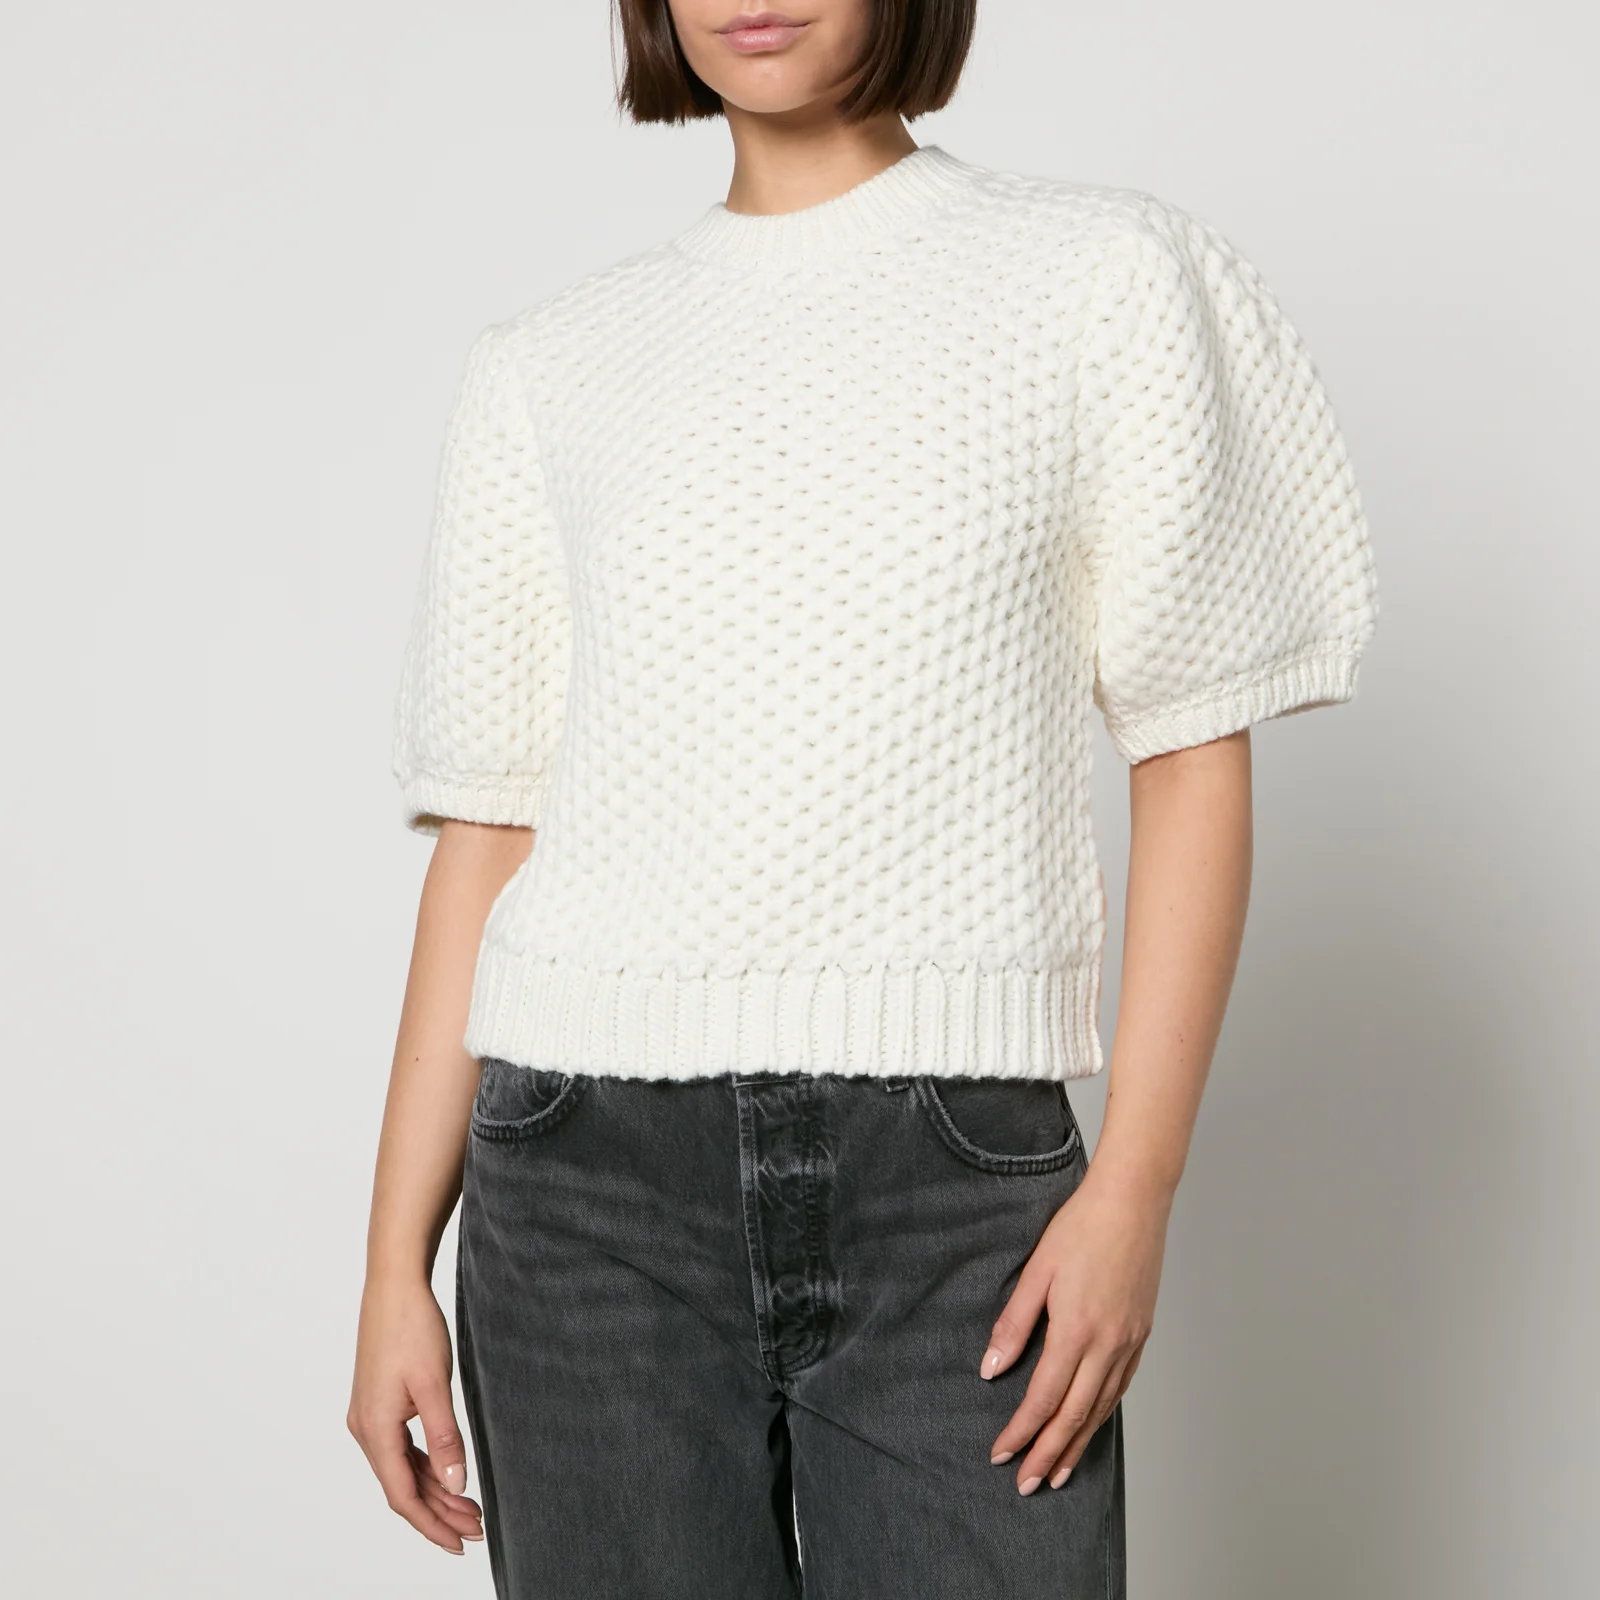 Anine Bing Brittany Wool-Blend Sweater Image 1